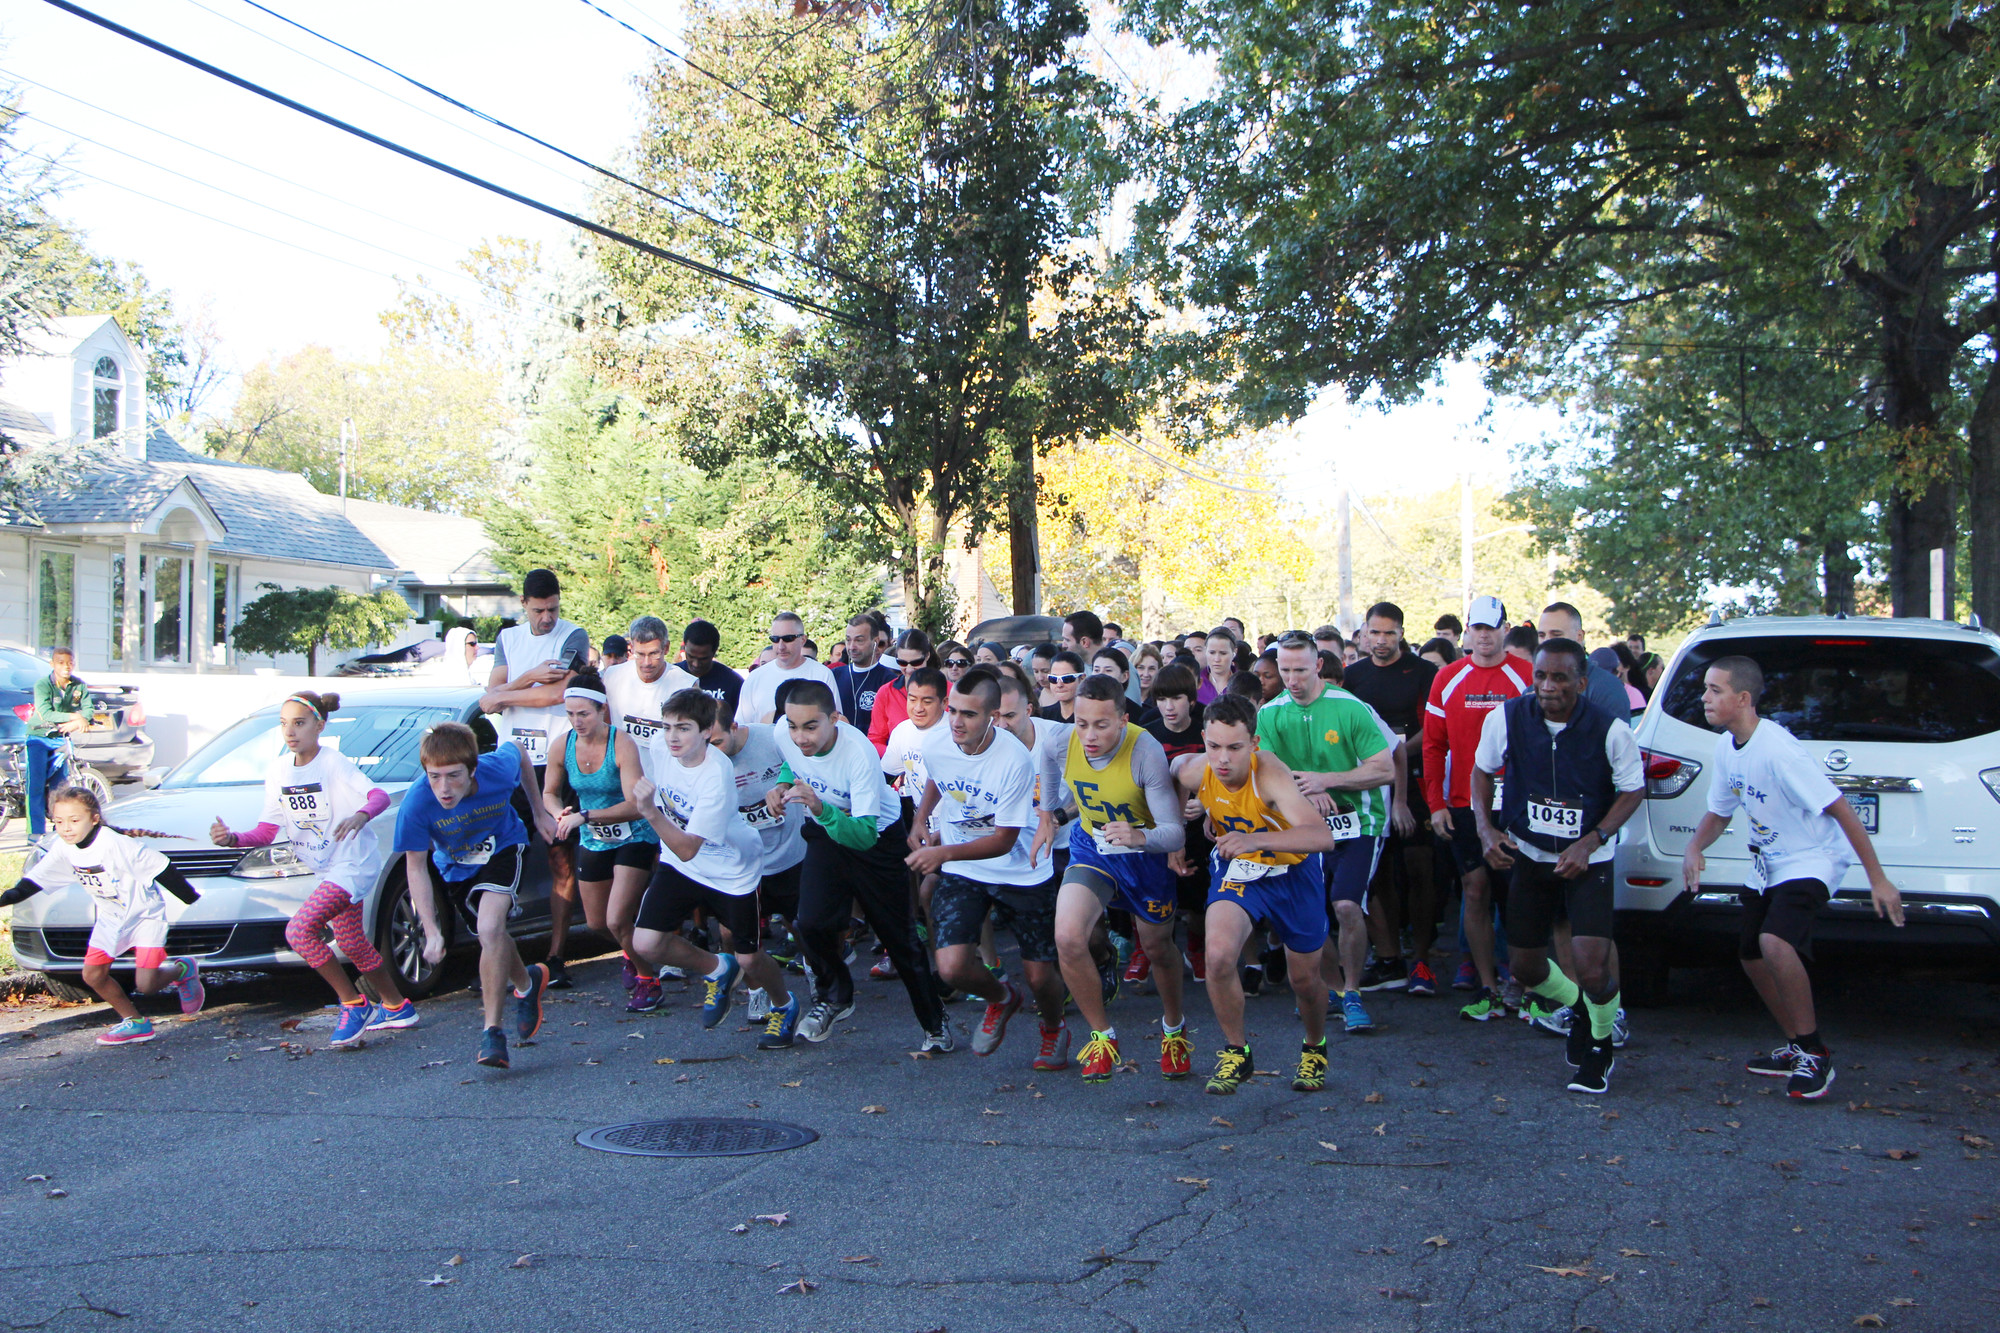 Nearly 500 runners participated in the 5K race and 1-mile fun run at McVey Elementary School last year.